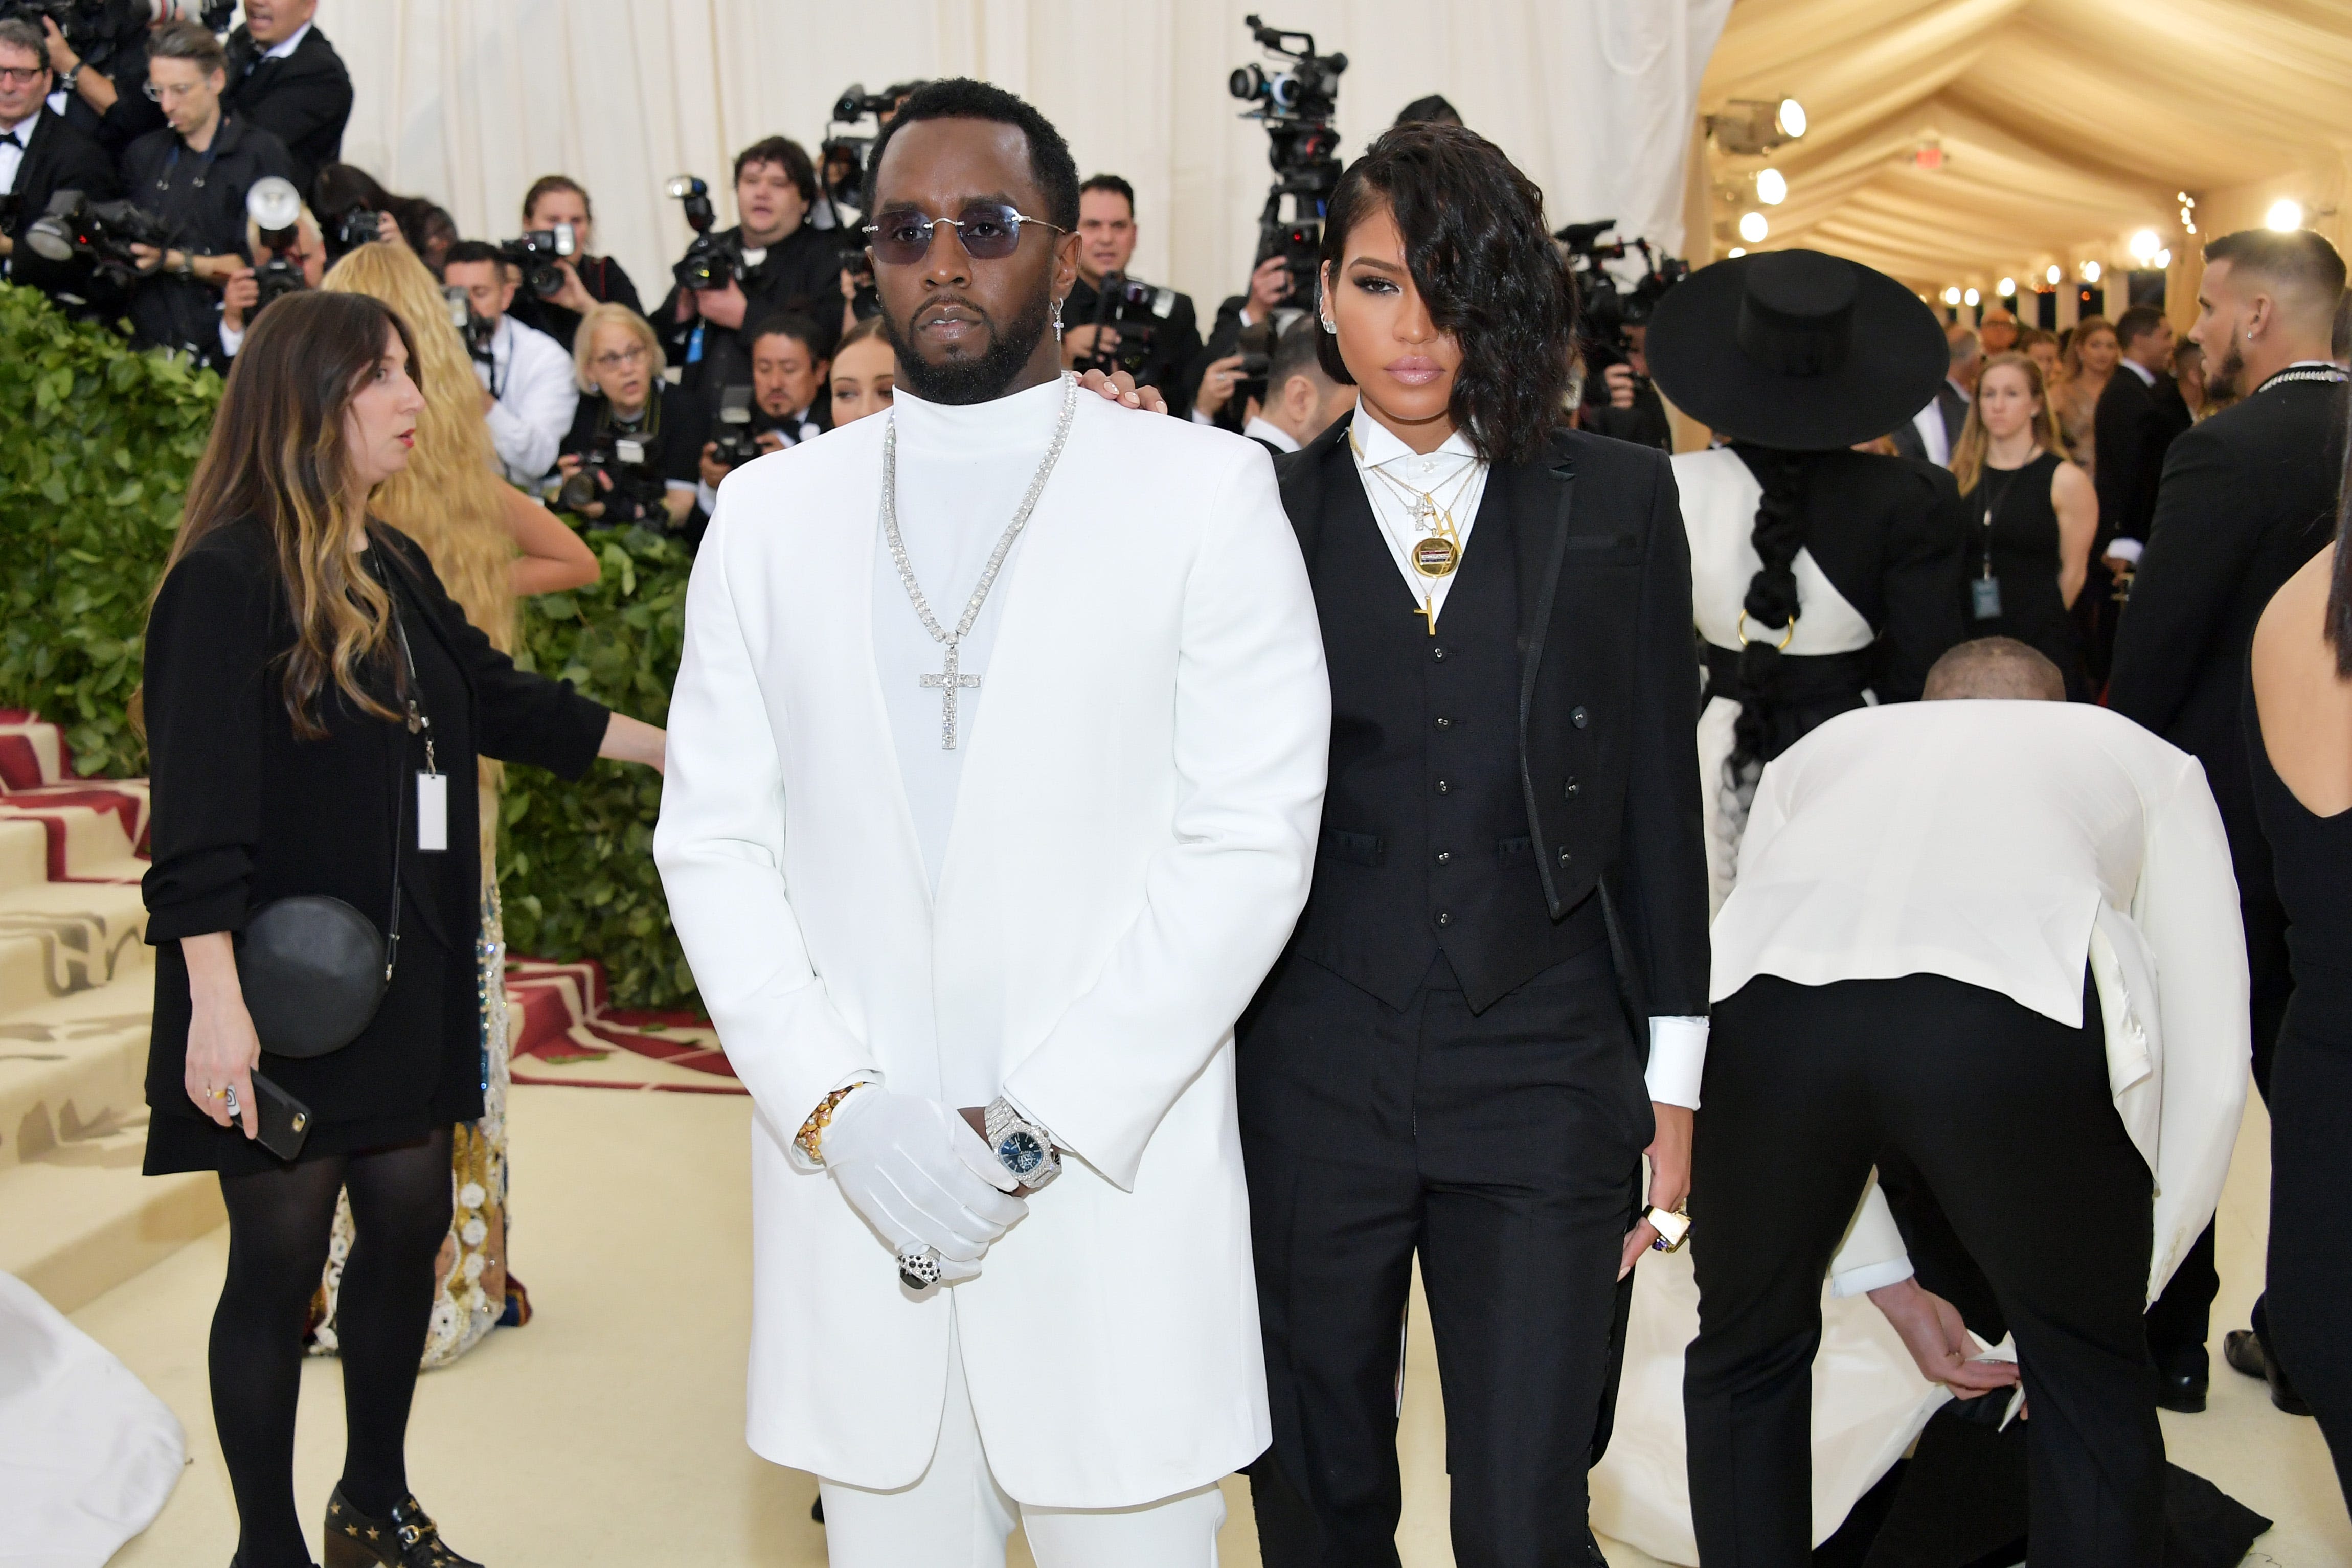 Cassie supporters say Diddy isn't a 'real man.' Experts say that response isn't helpful.